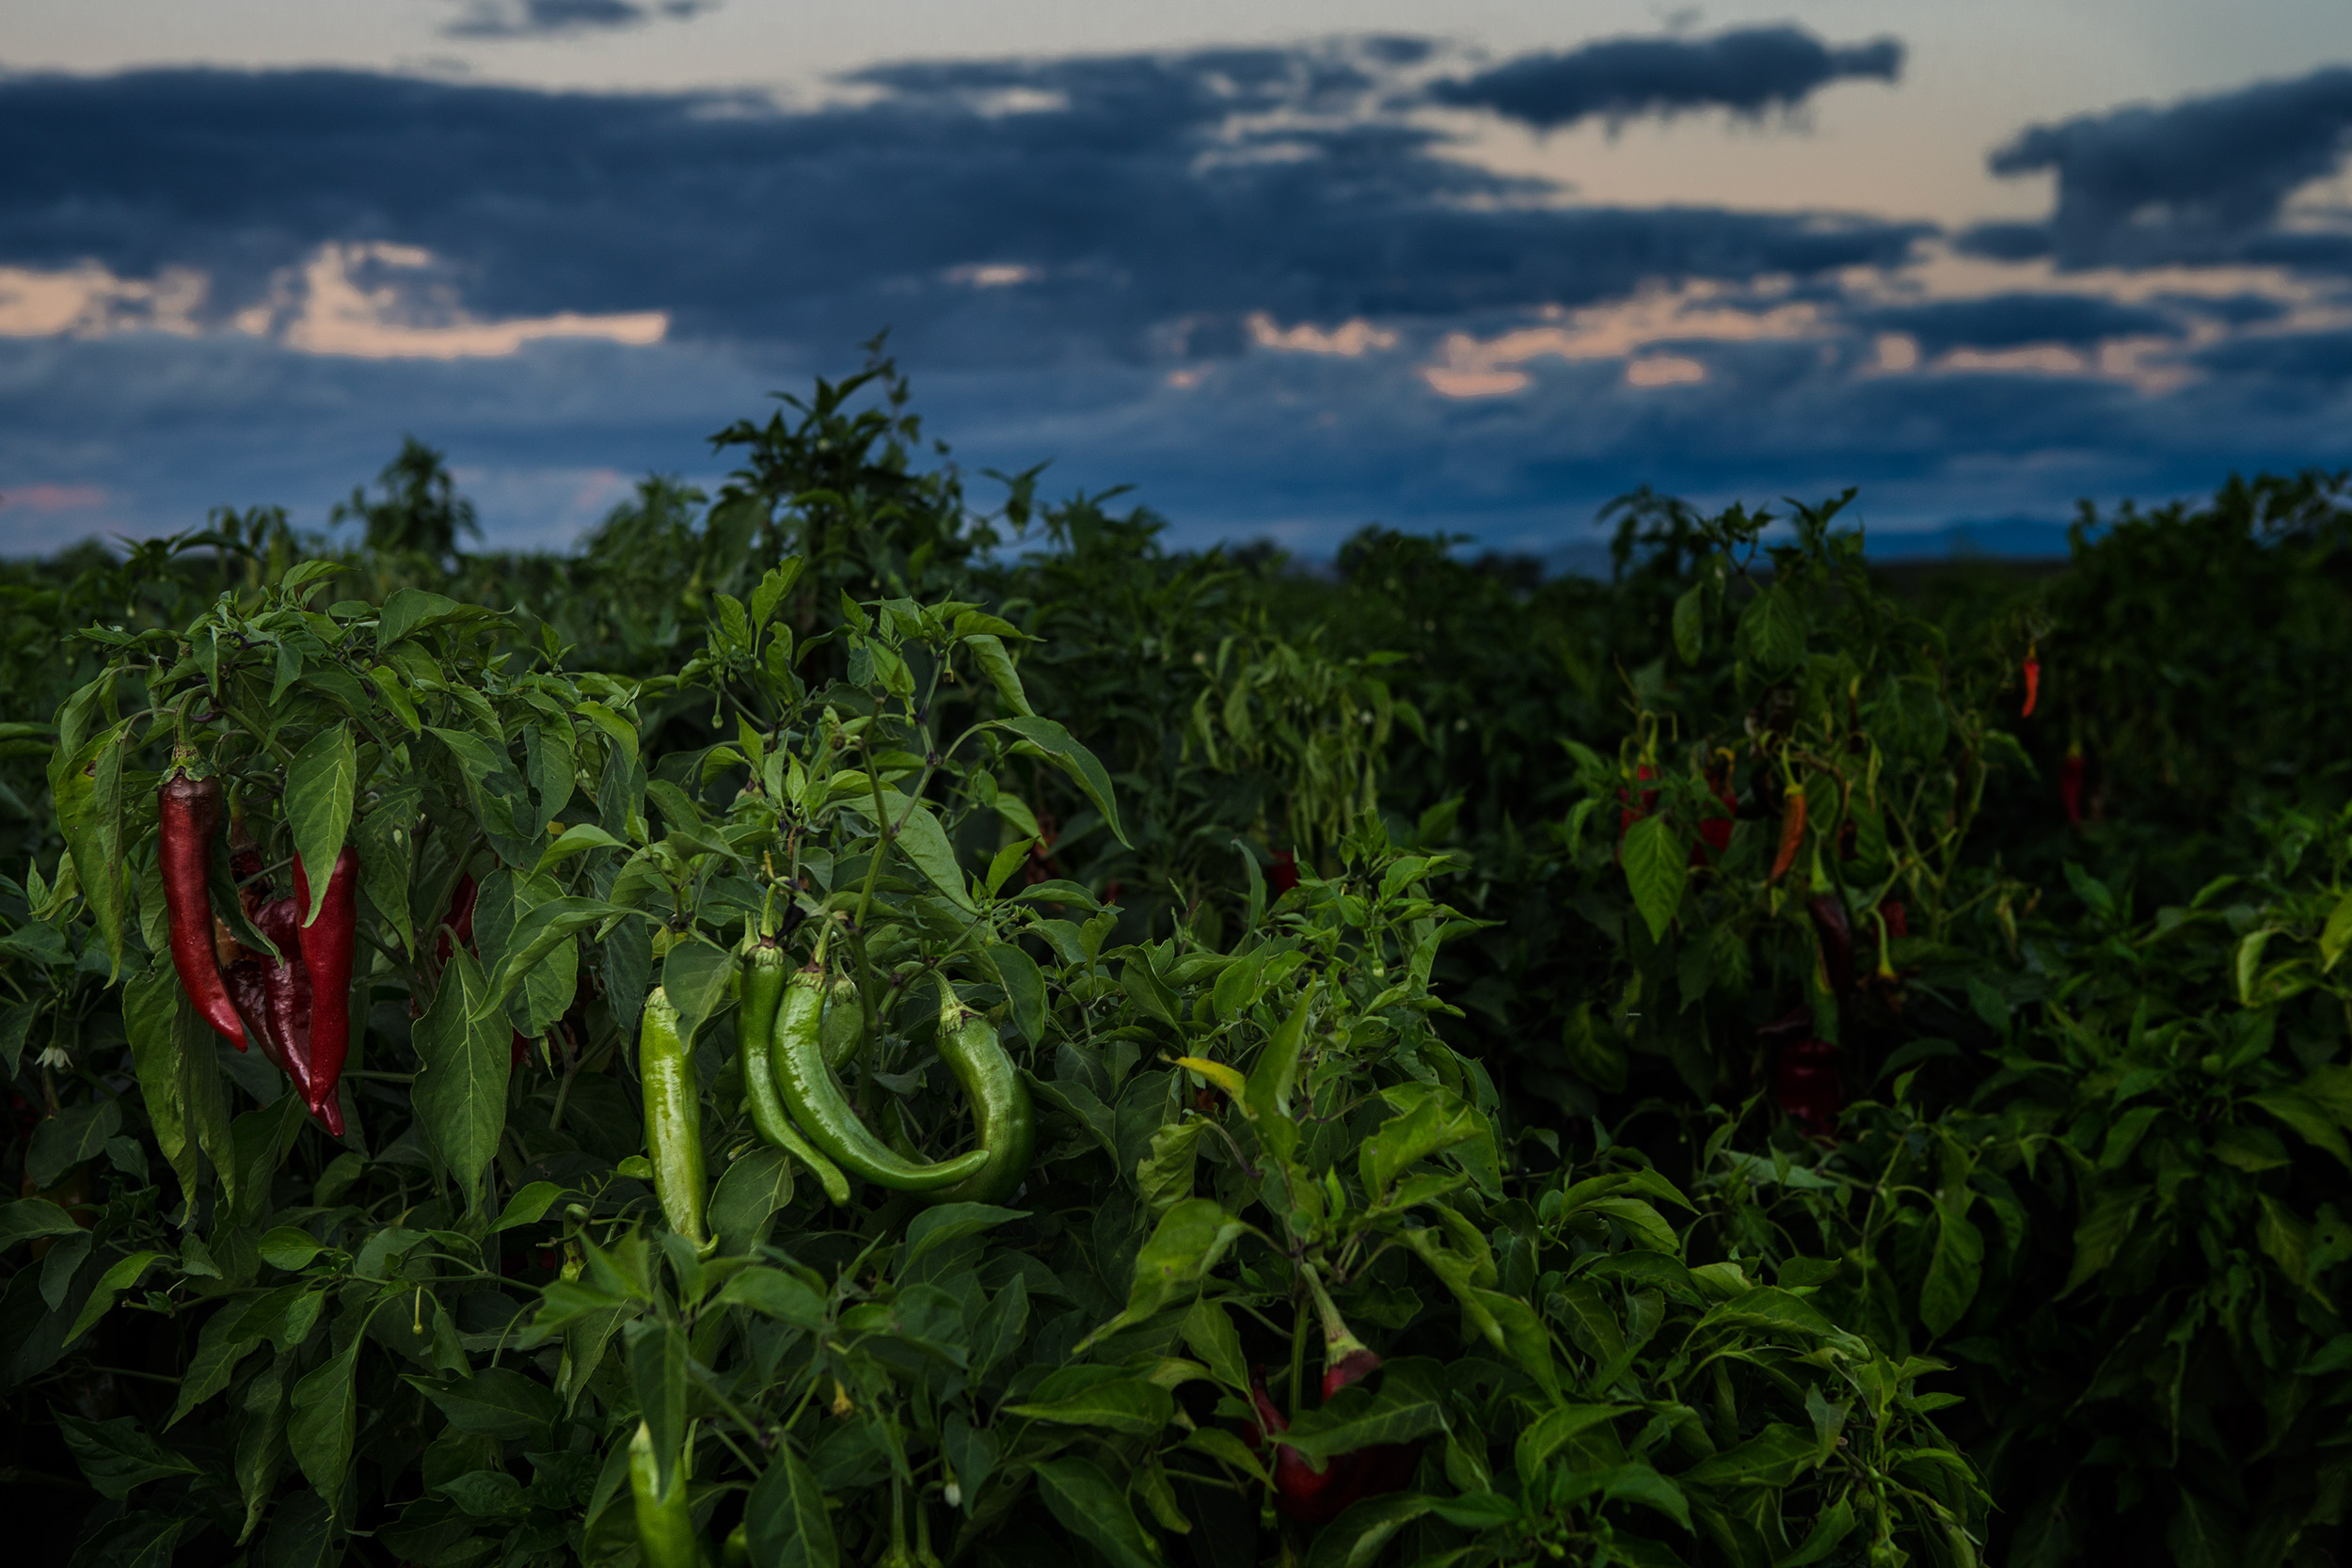 Agriculture photography with red and green hot chili peppers in field.